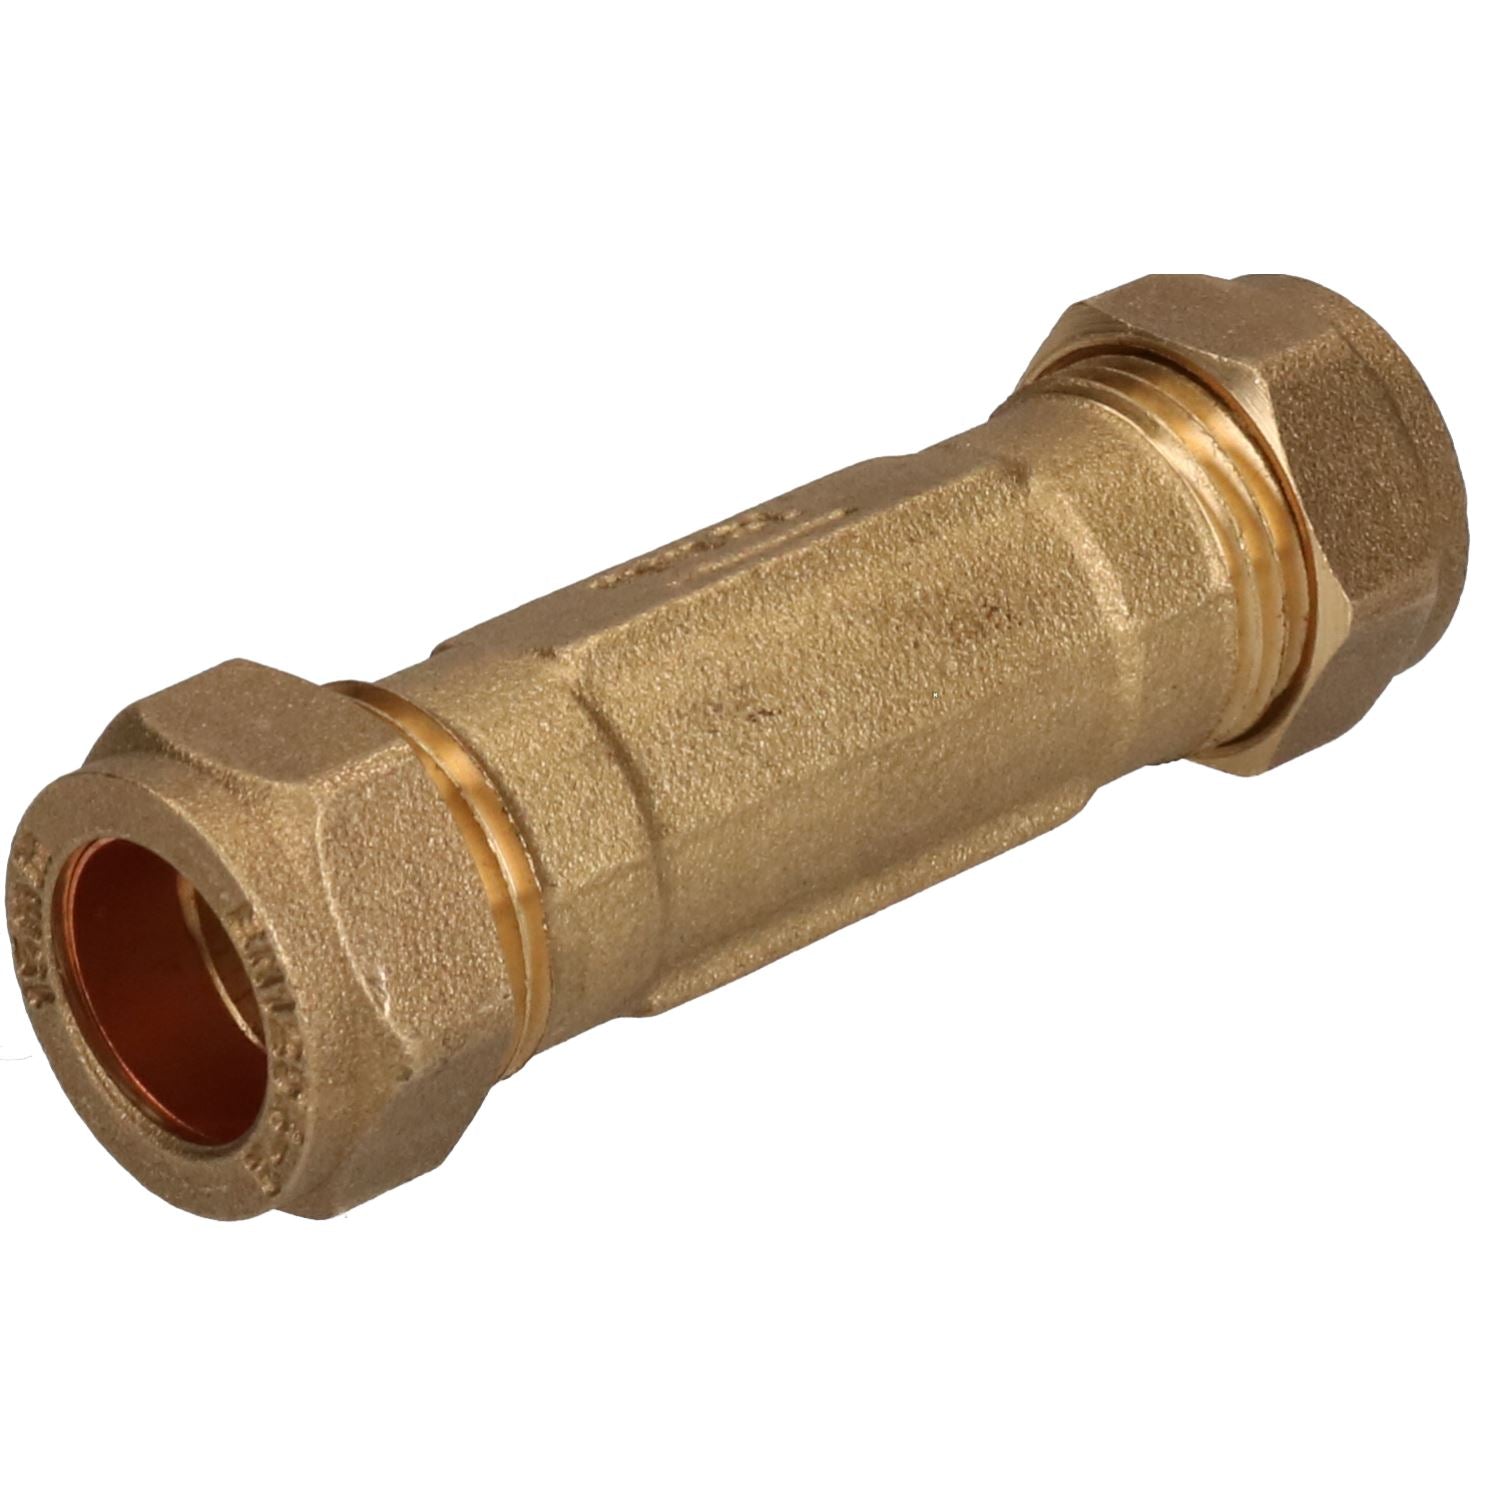 15mm Brass Double Check Valve One-Way Non-Return Compression Fittings WRAS